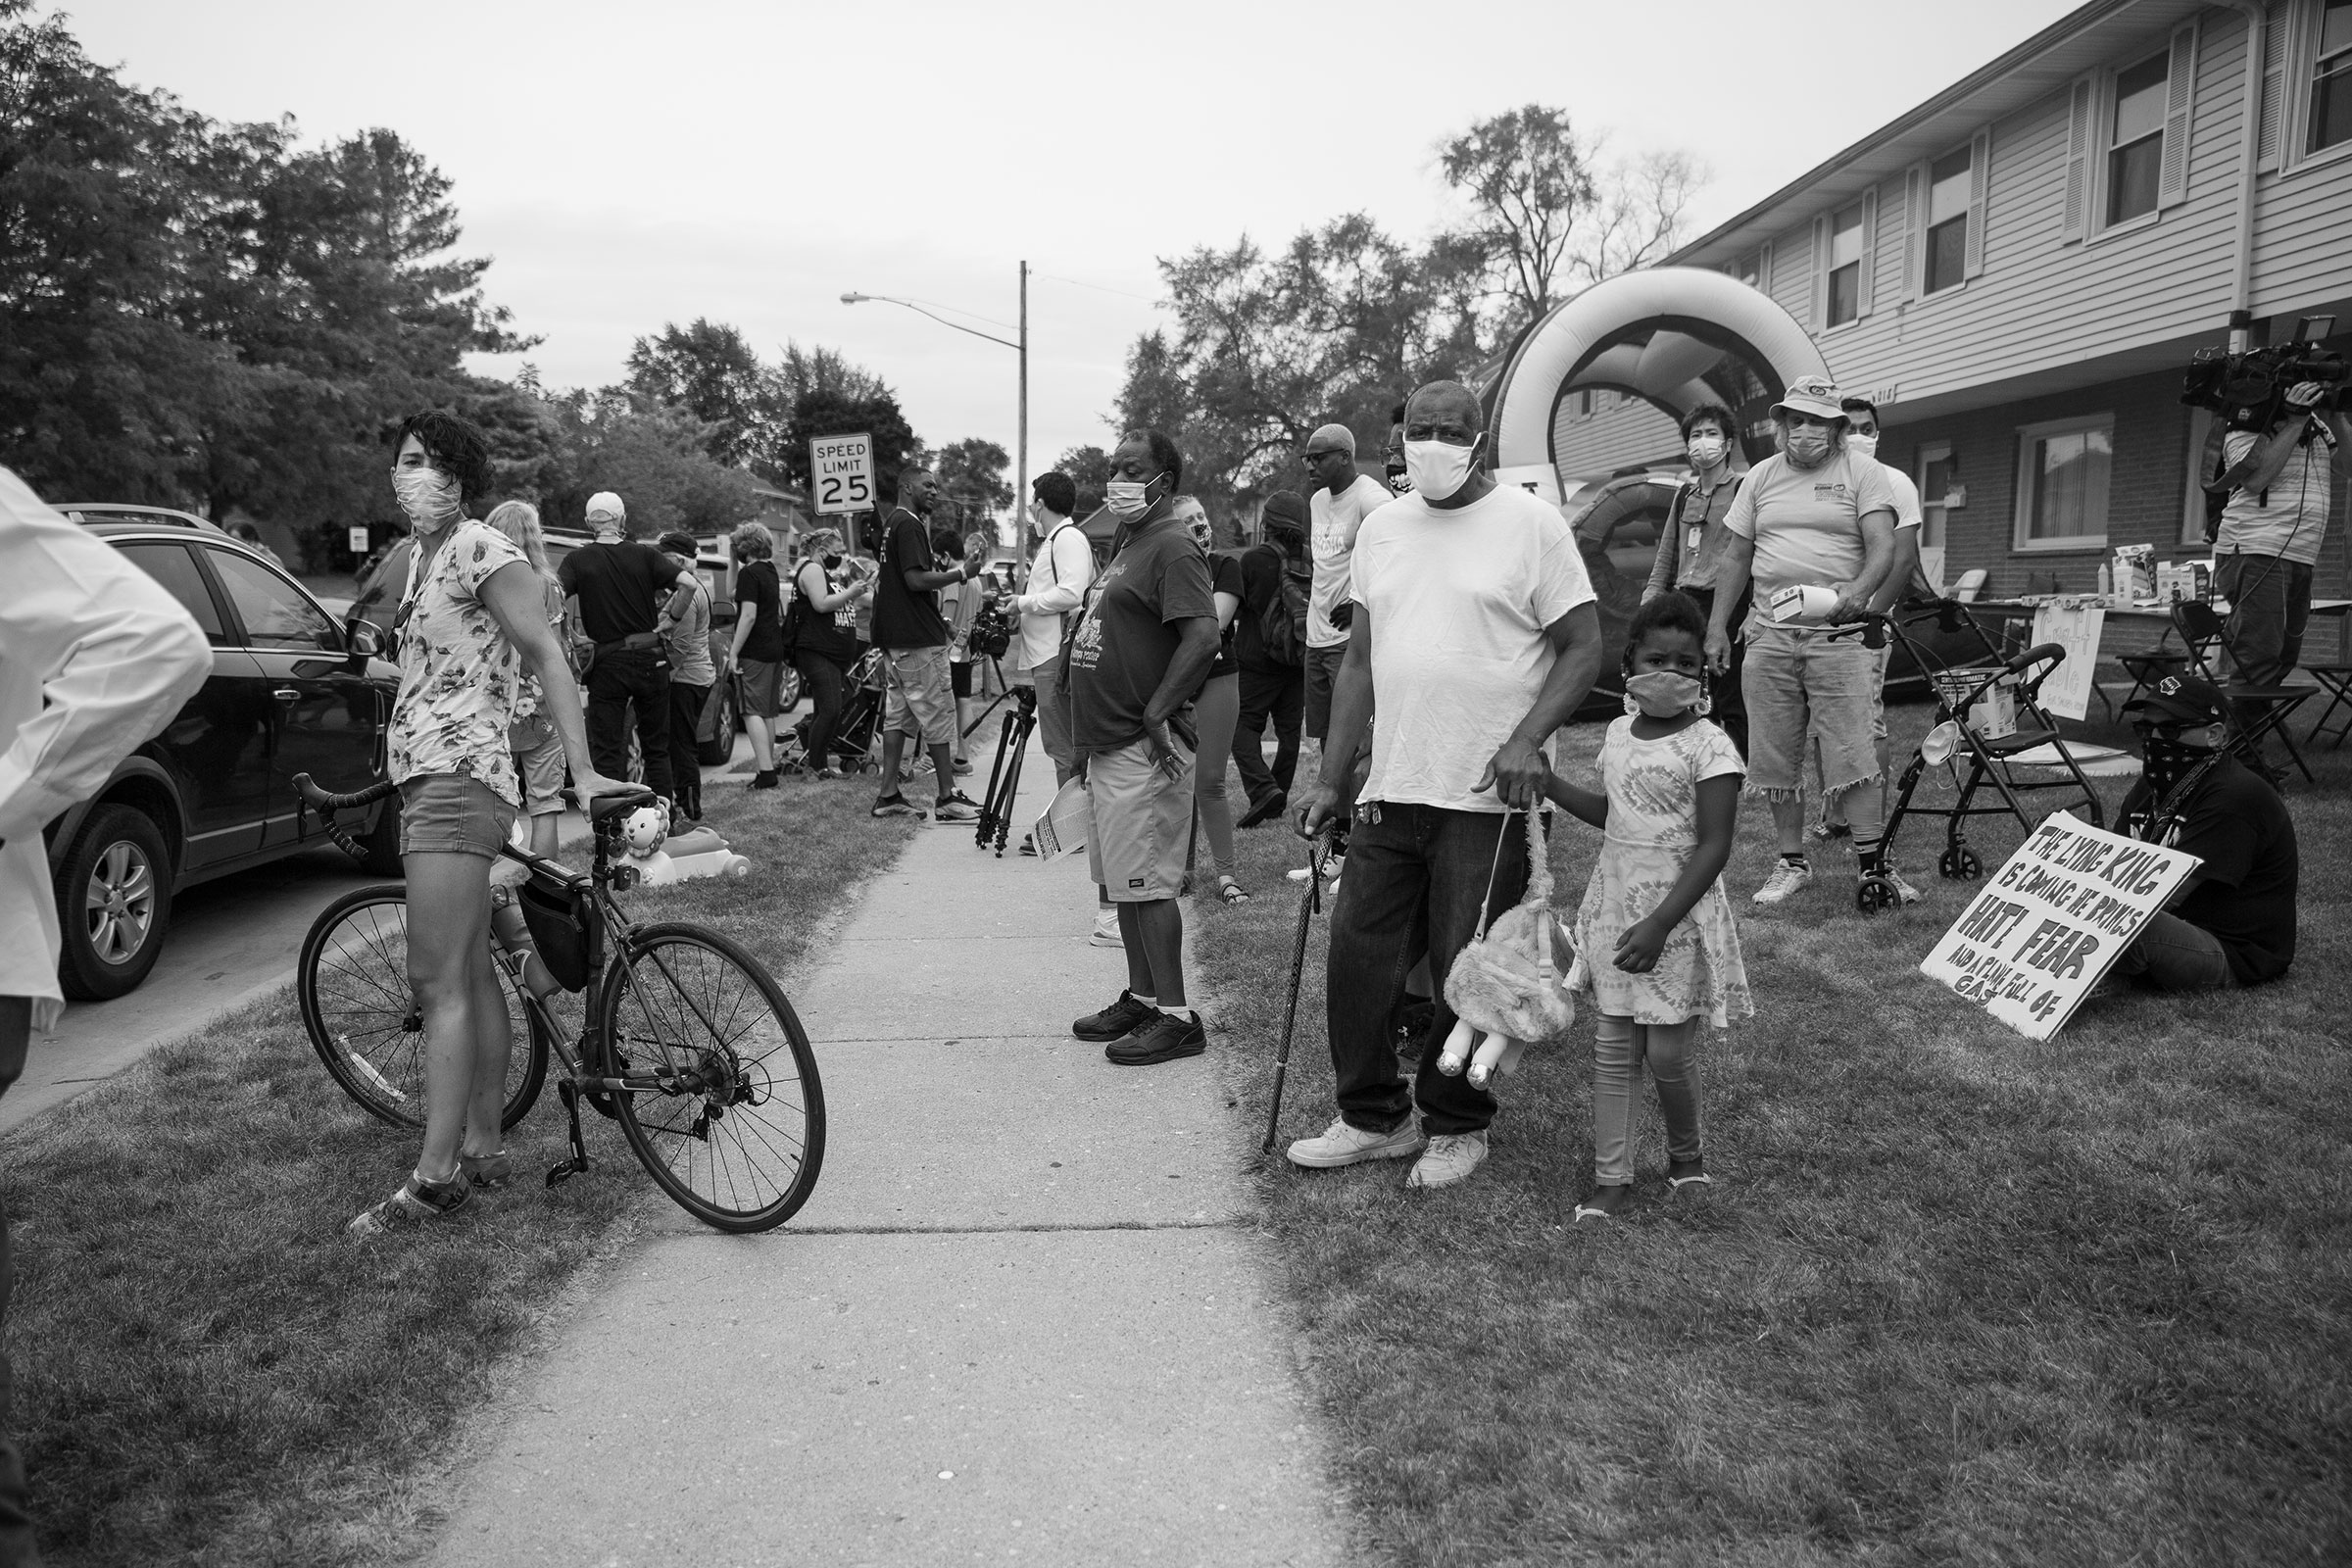 A peaceful gathering early Tuesday near the site where Jacob Blake was shot by police in Kenosha, Wis., on Sept. 1, 2020. (Patience Zalanga for TIME)